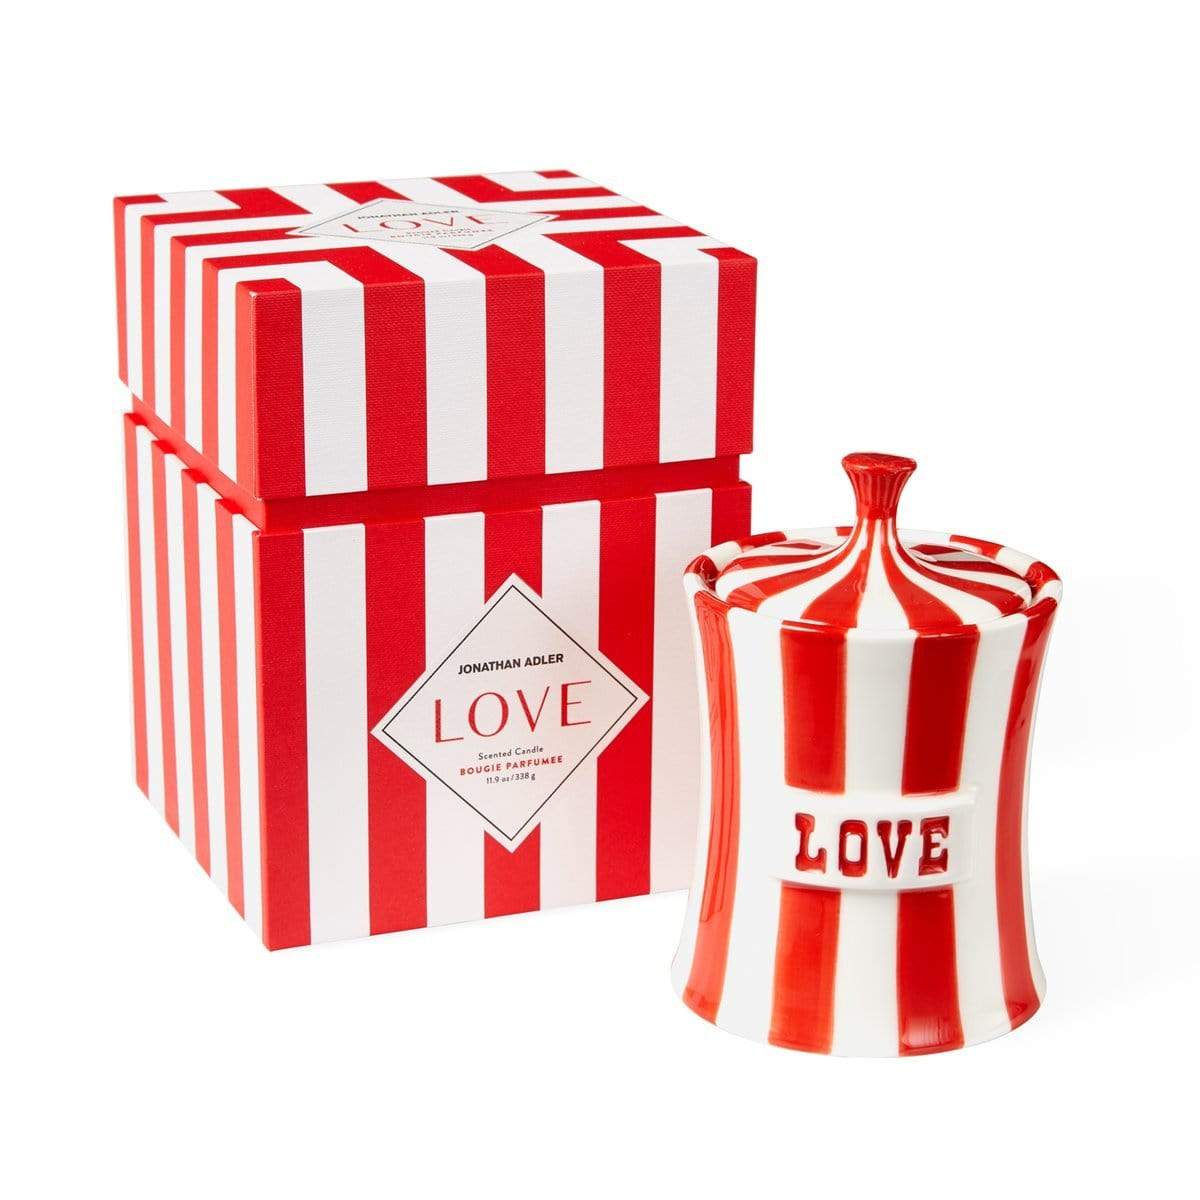 Jonathan Adler Vice - Love -Red Candle